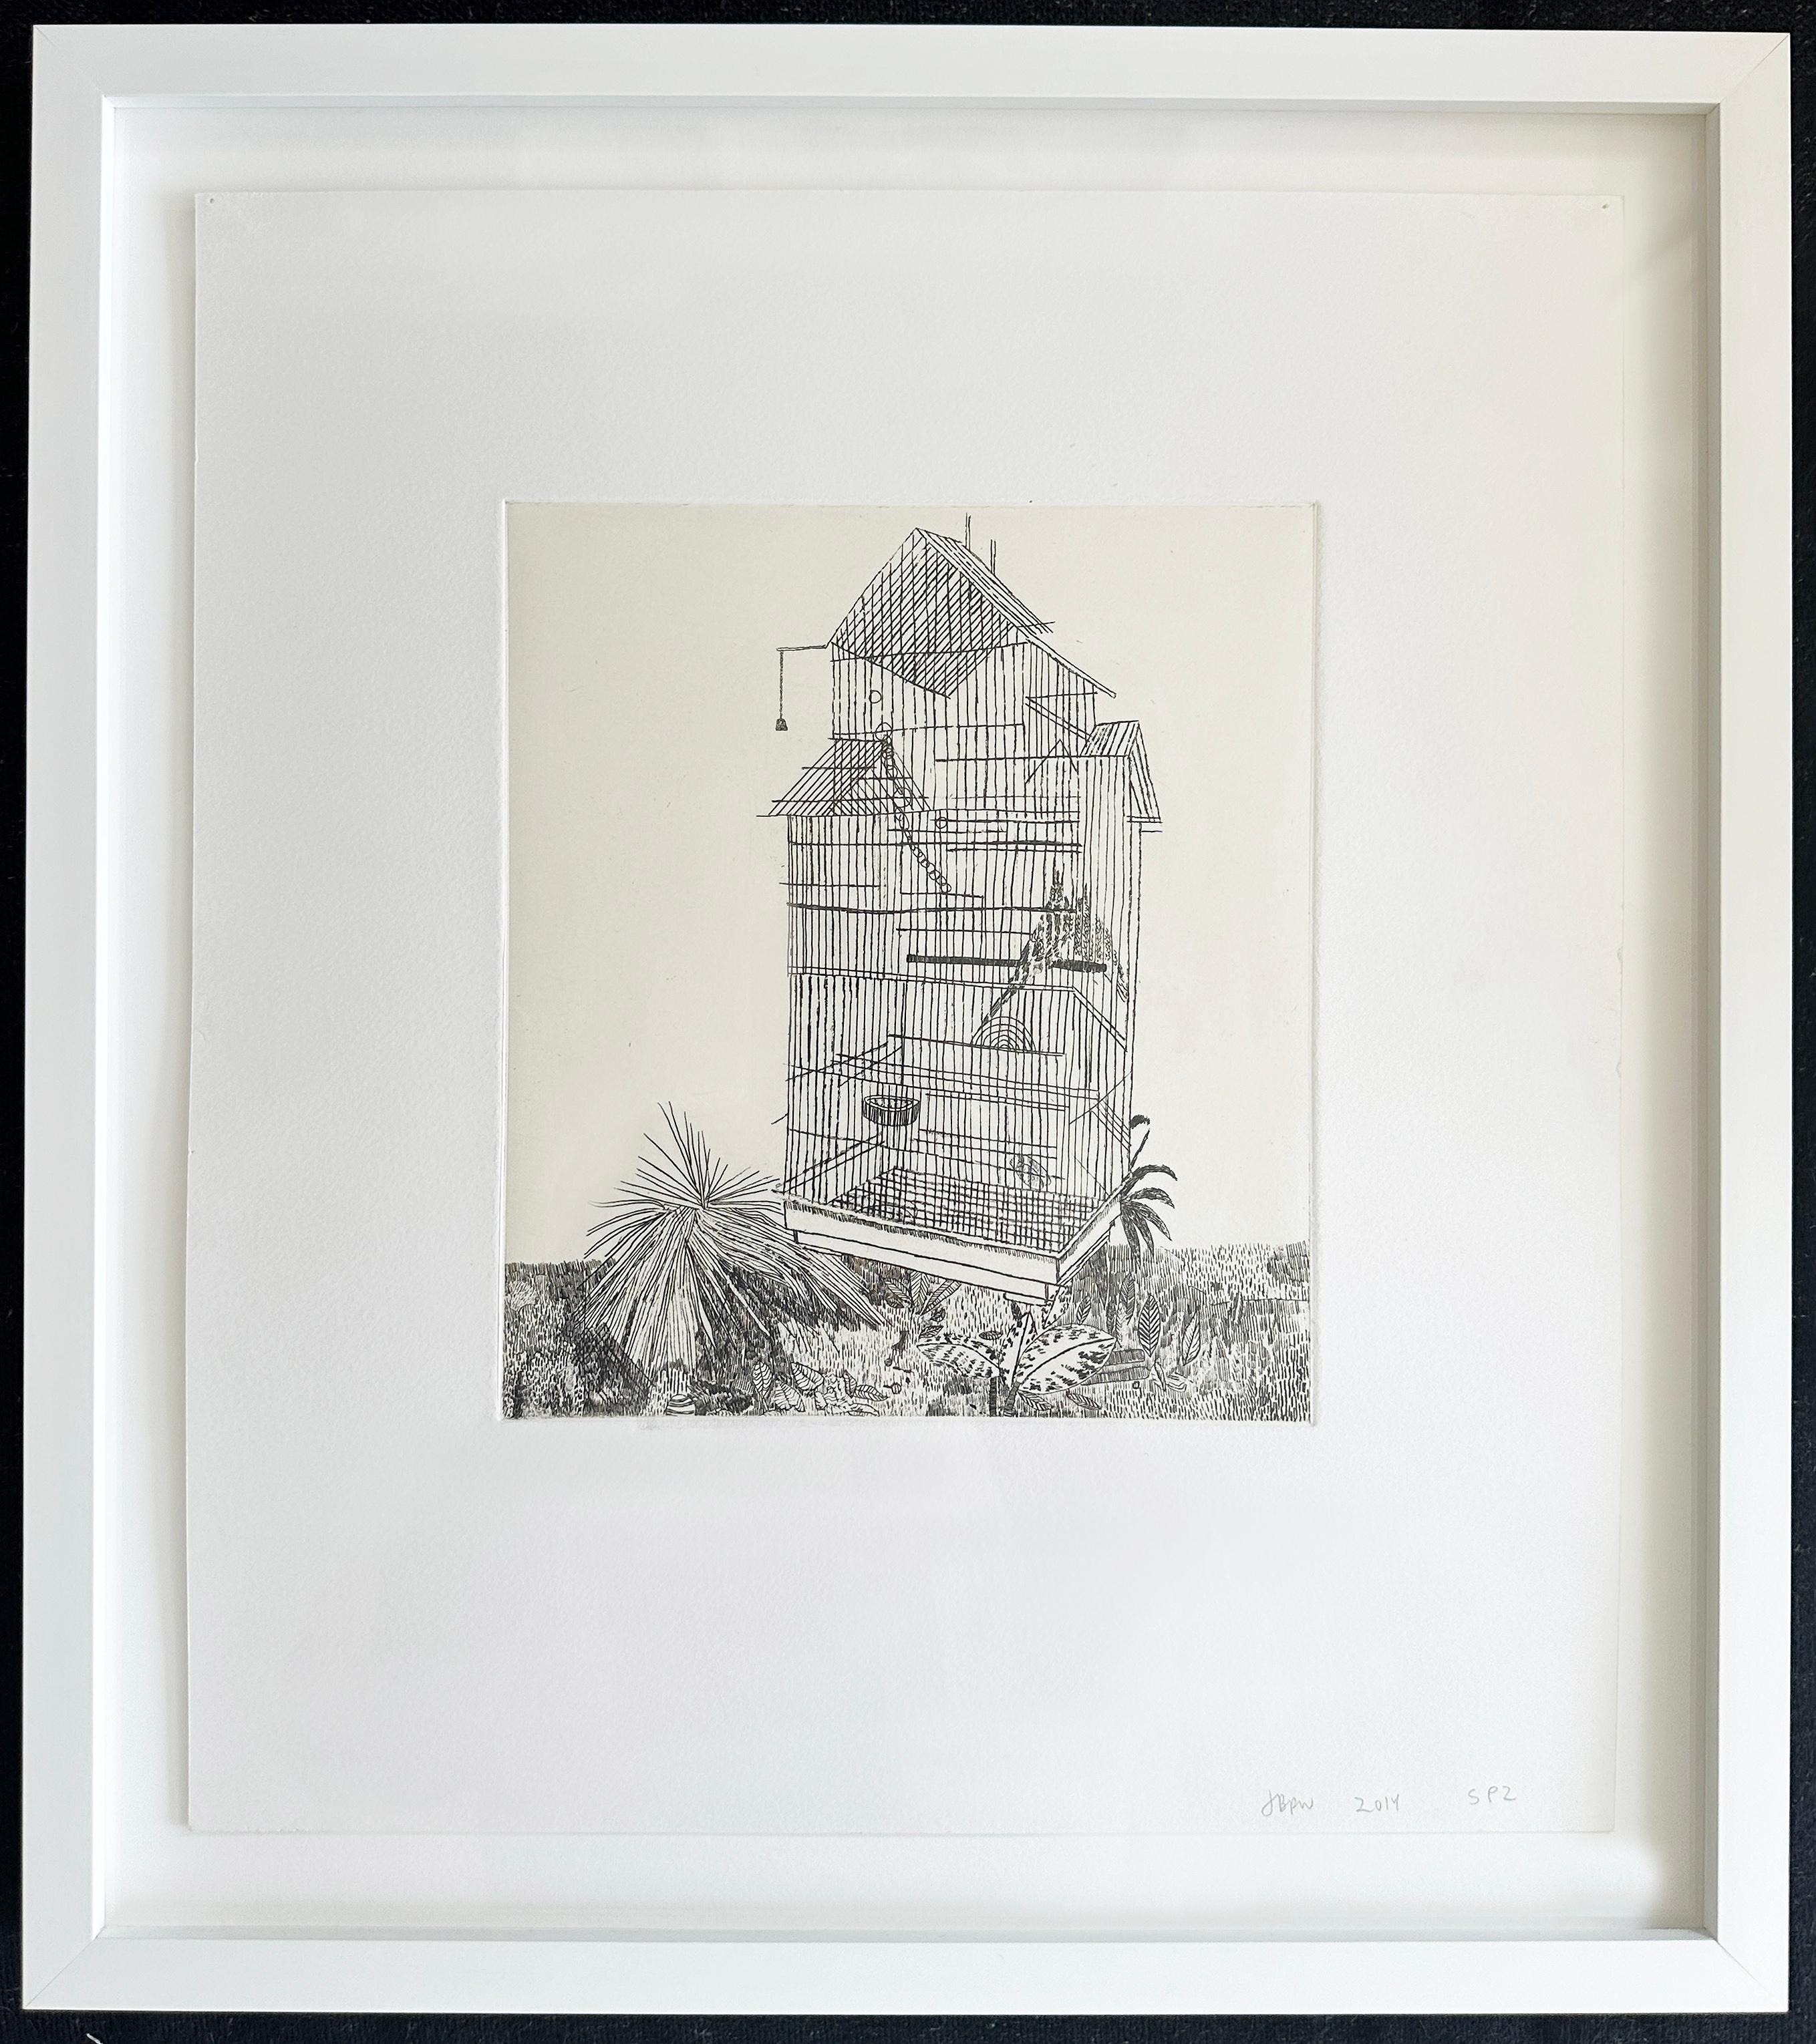 Rare Jonas Wood print!
etching 
2014
paper size- 15.75 x 13.75
frame size- 18.75 x 16.75 x 1.5"
signed and dated
SP2
*two small pinholes in the upper corner, from artist's studio